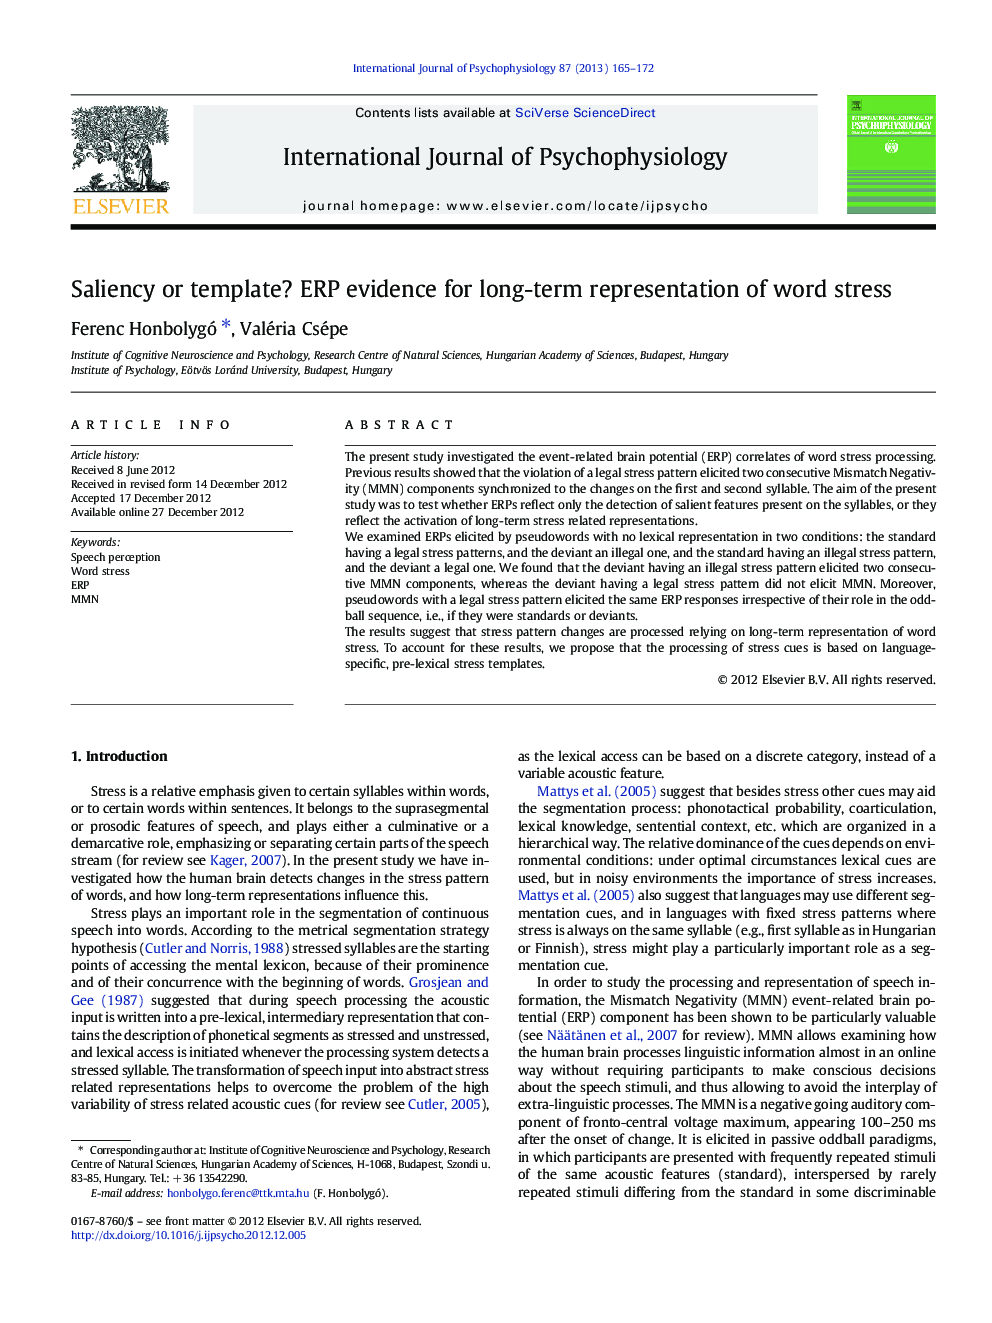 Saliency or template? ERP evidence for long-term representation of word stress